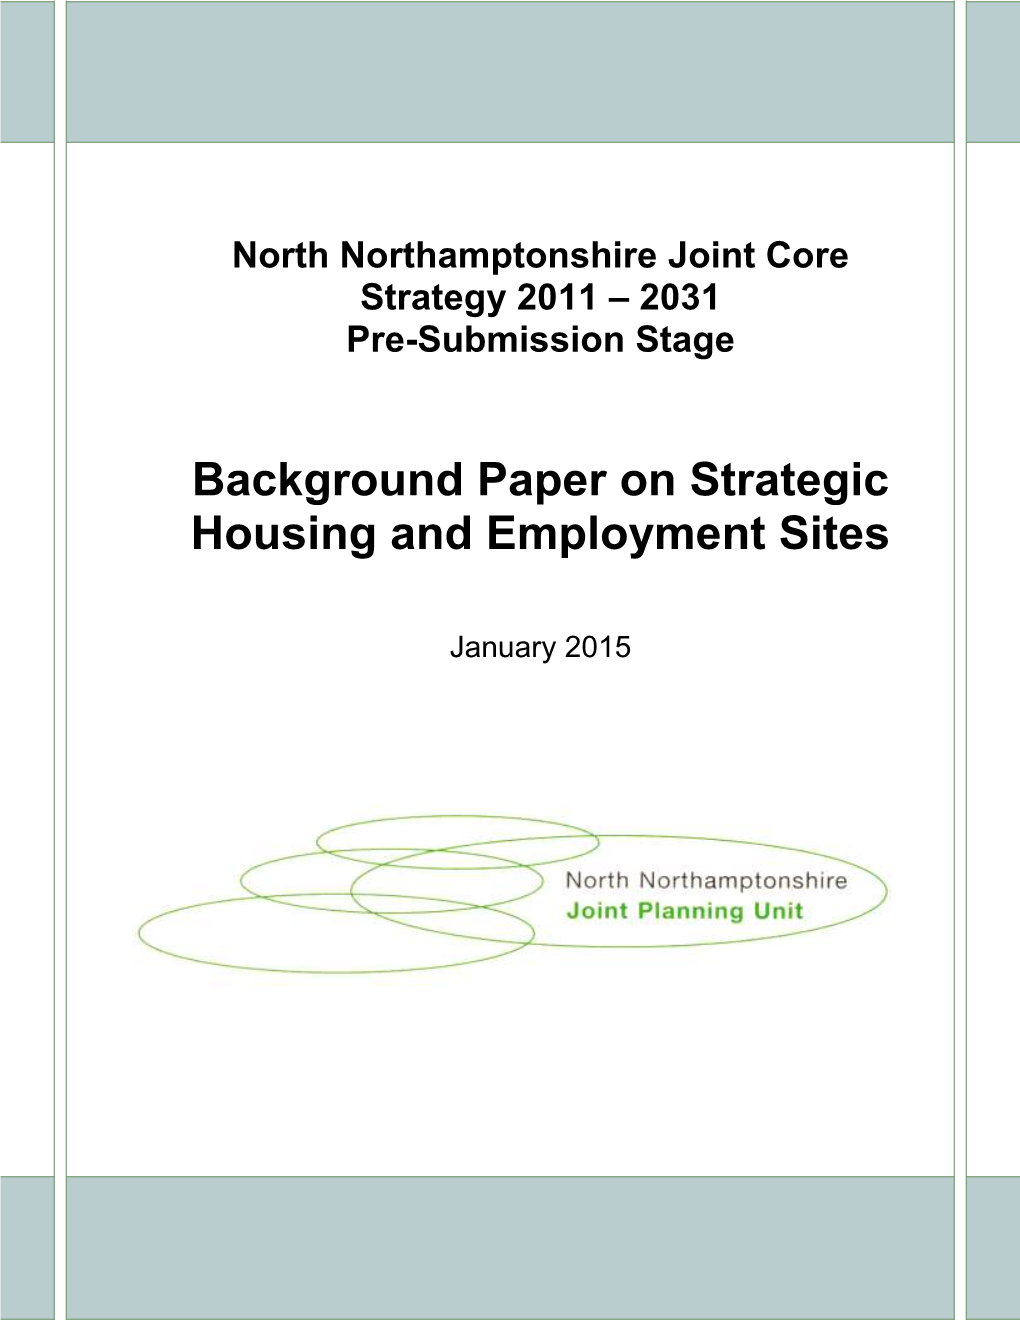 Background Paper on Strategic Housing and Employment Sites